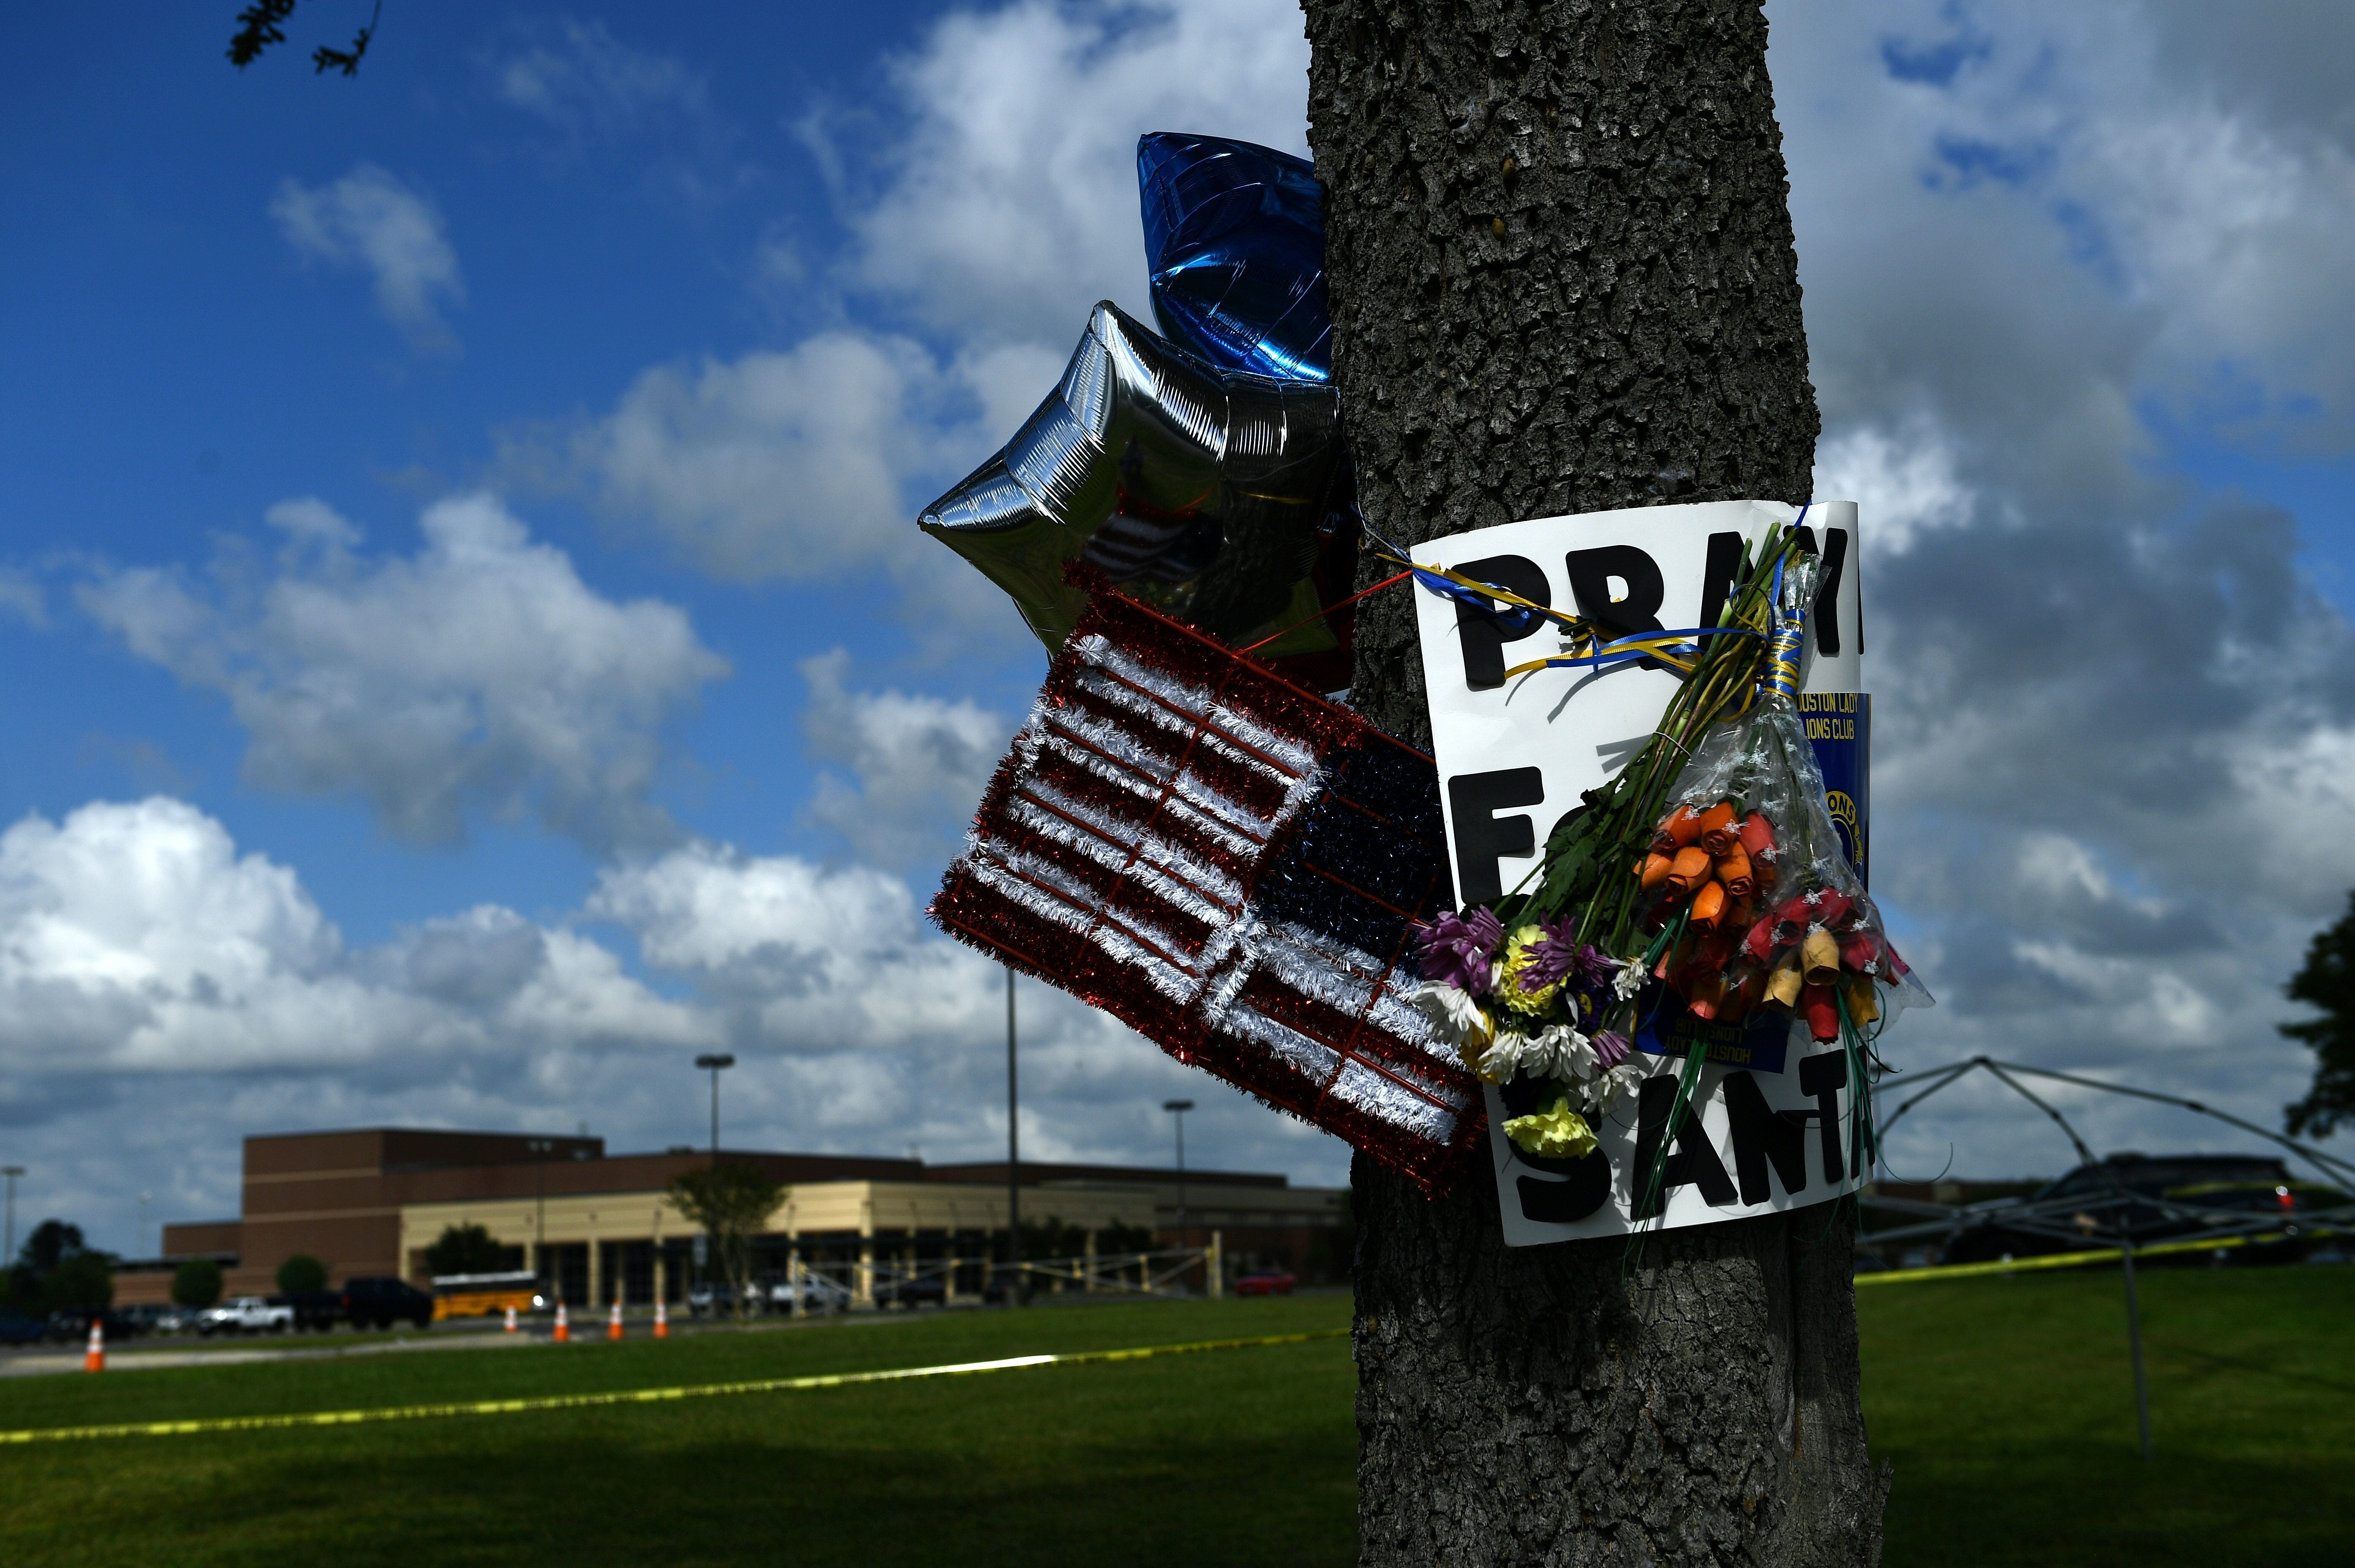 Memorial items hang on a tree near Santa Fe High School in Santa Fe, Texas, a day after eight students and two teachers were killed when a 17-year-old classmate allegedly opened fire at the school.
